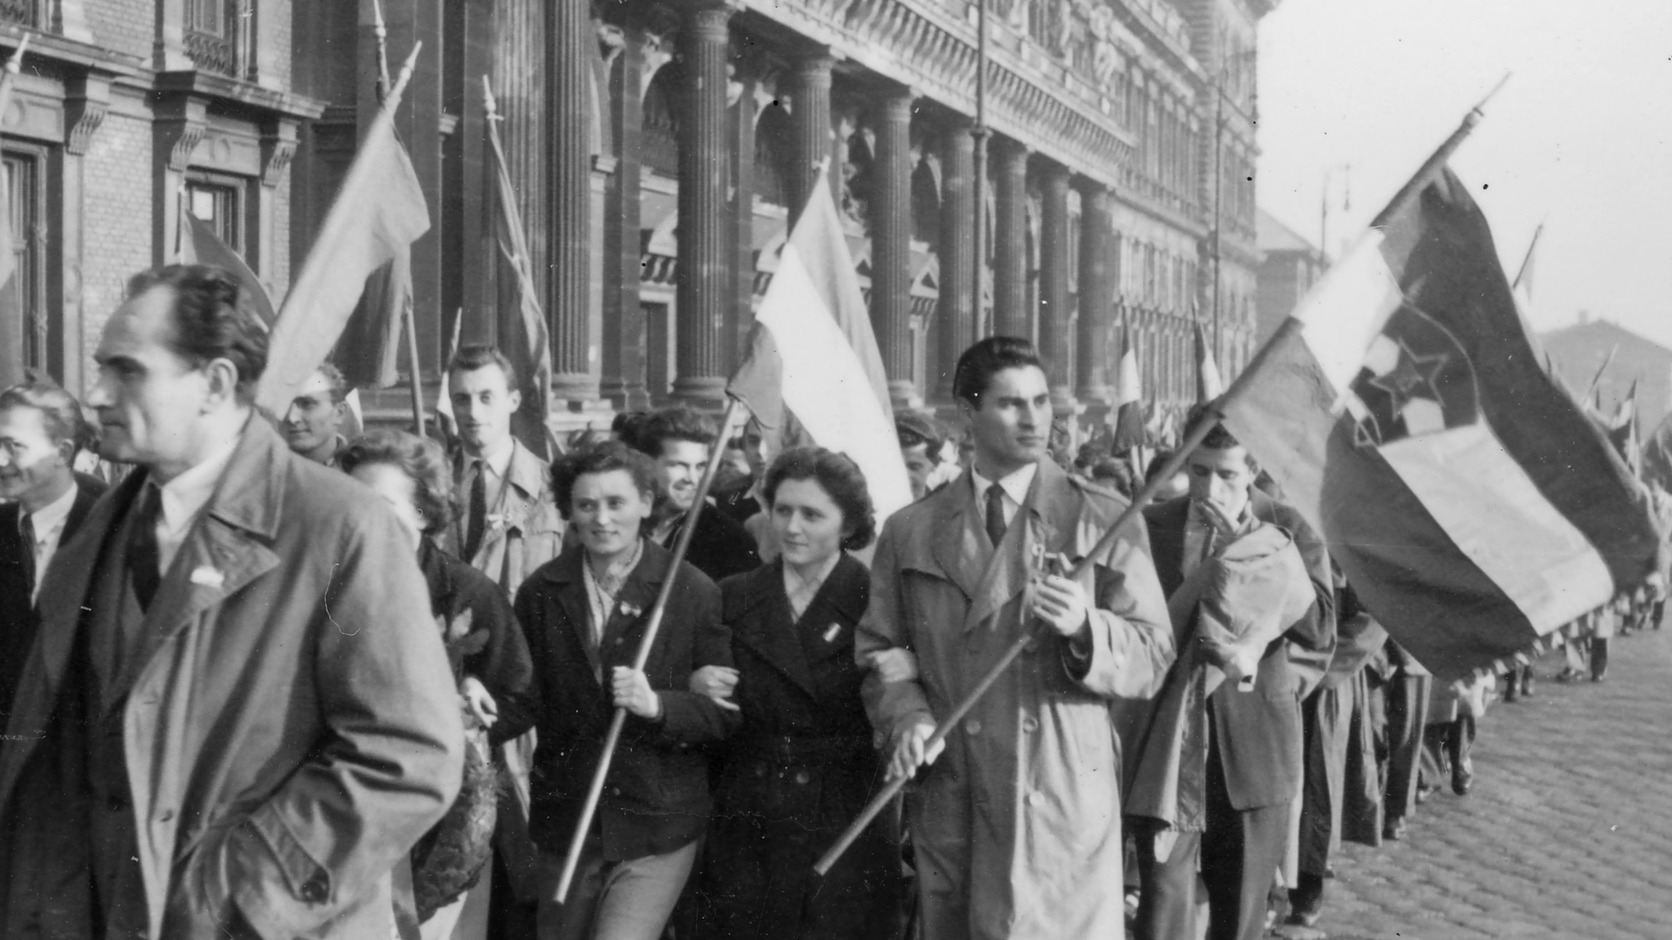 Video: Hungarian Holiday On 23 October - Remembering The 1956 Revolution